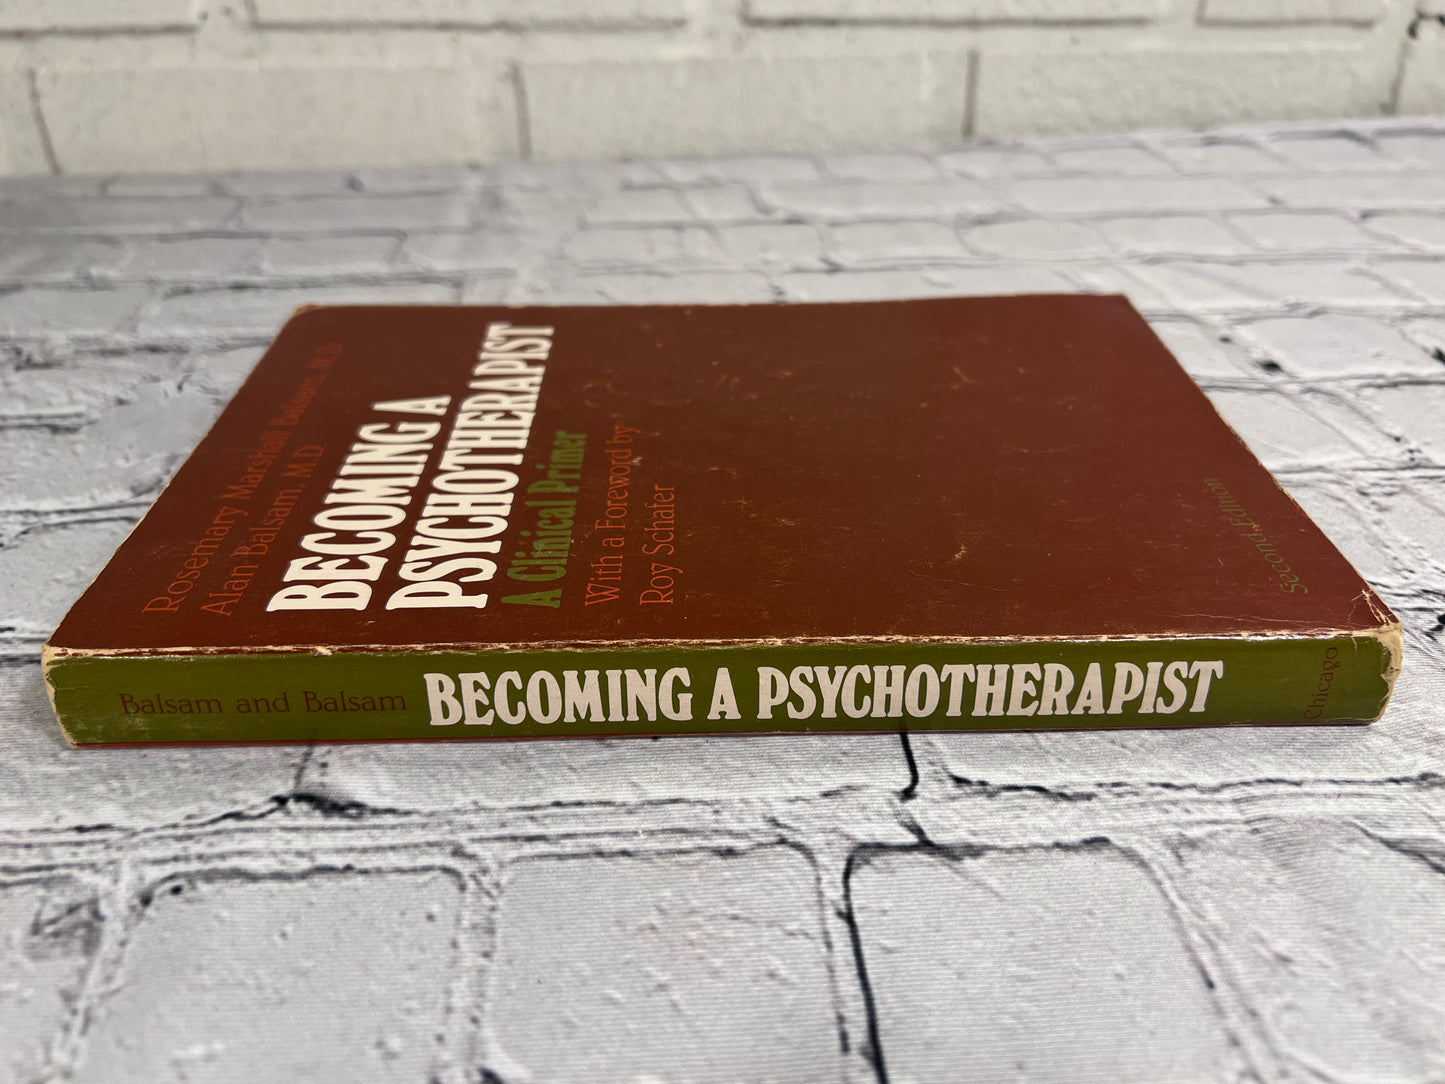 Becoming a Psychotherapist: A Clinical Primer by Rosemary Marshall Balsam, Alan Balsam